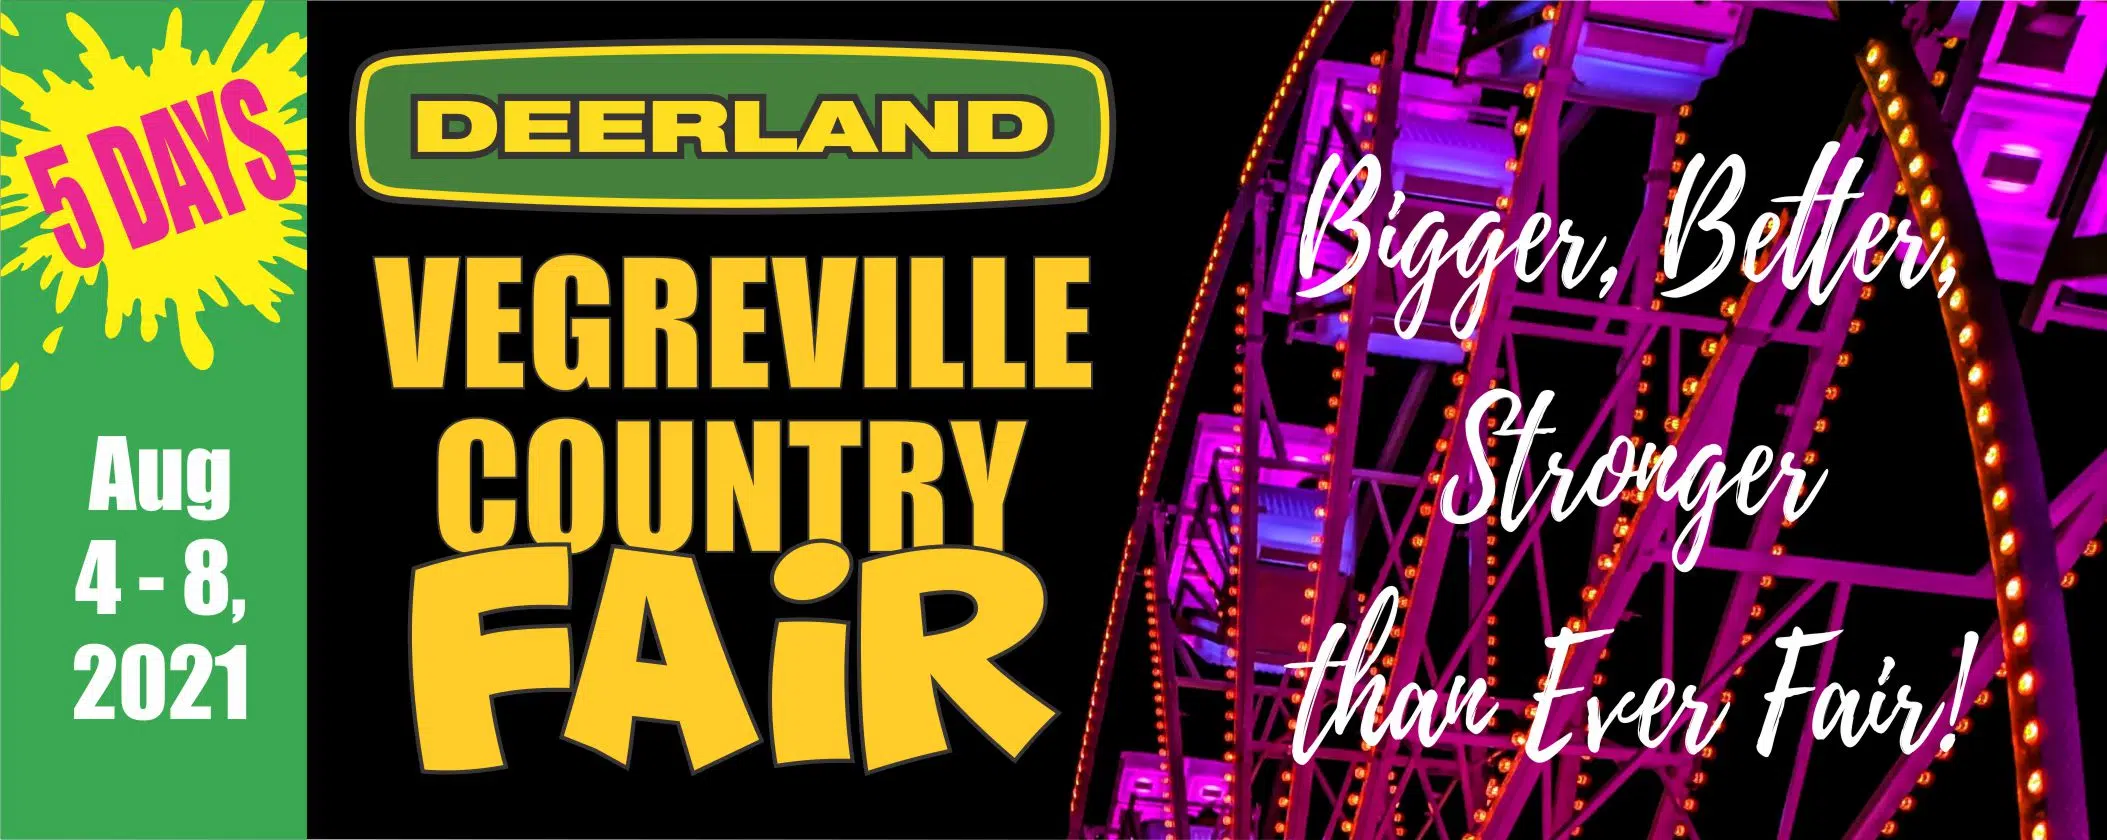 Vegreville Country Fair Attracts Thousands